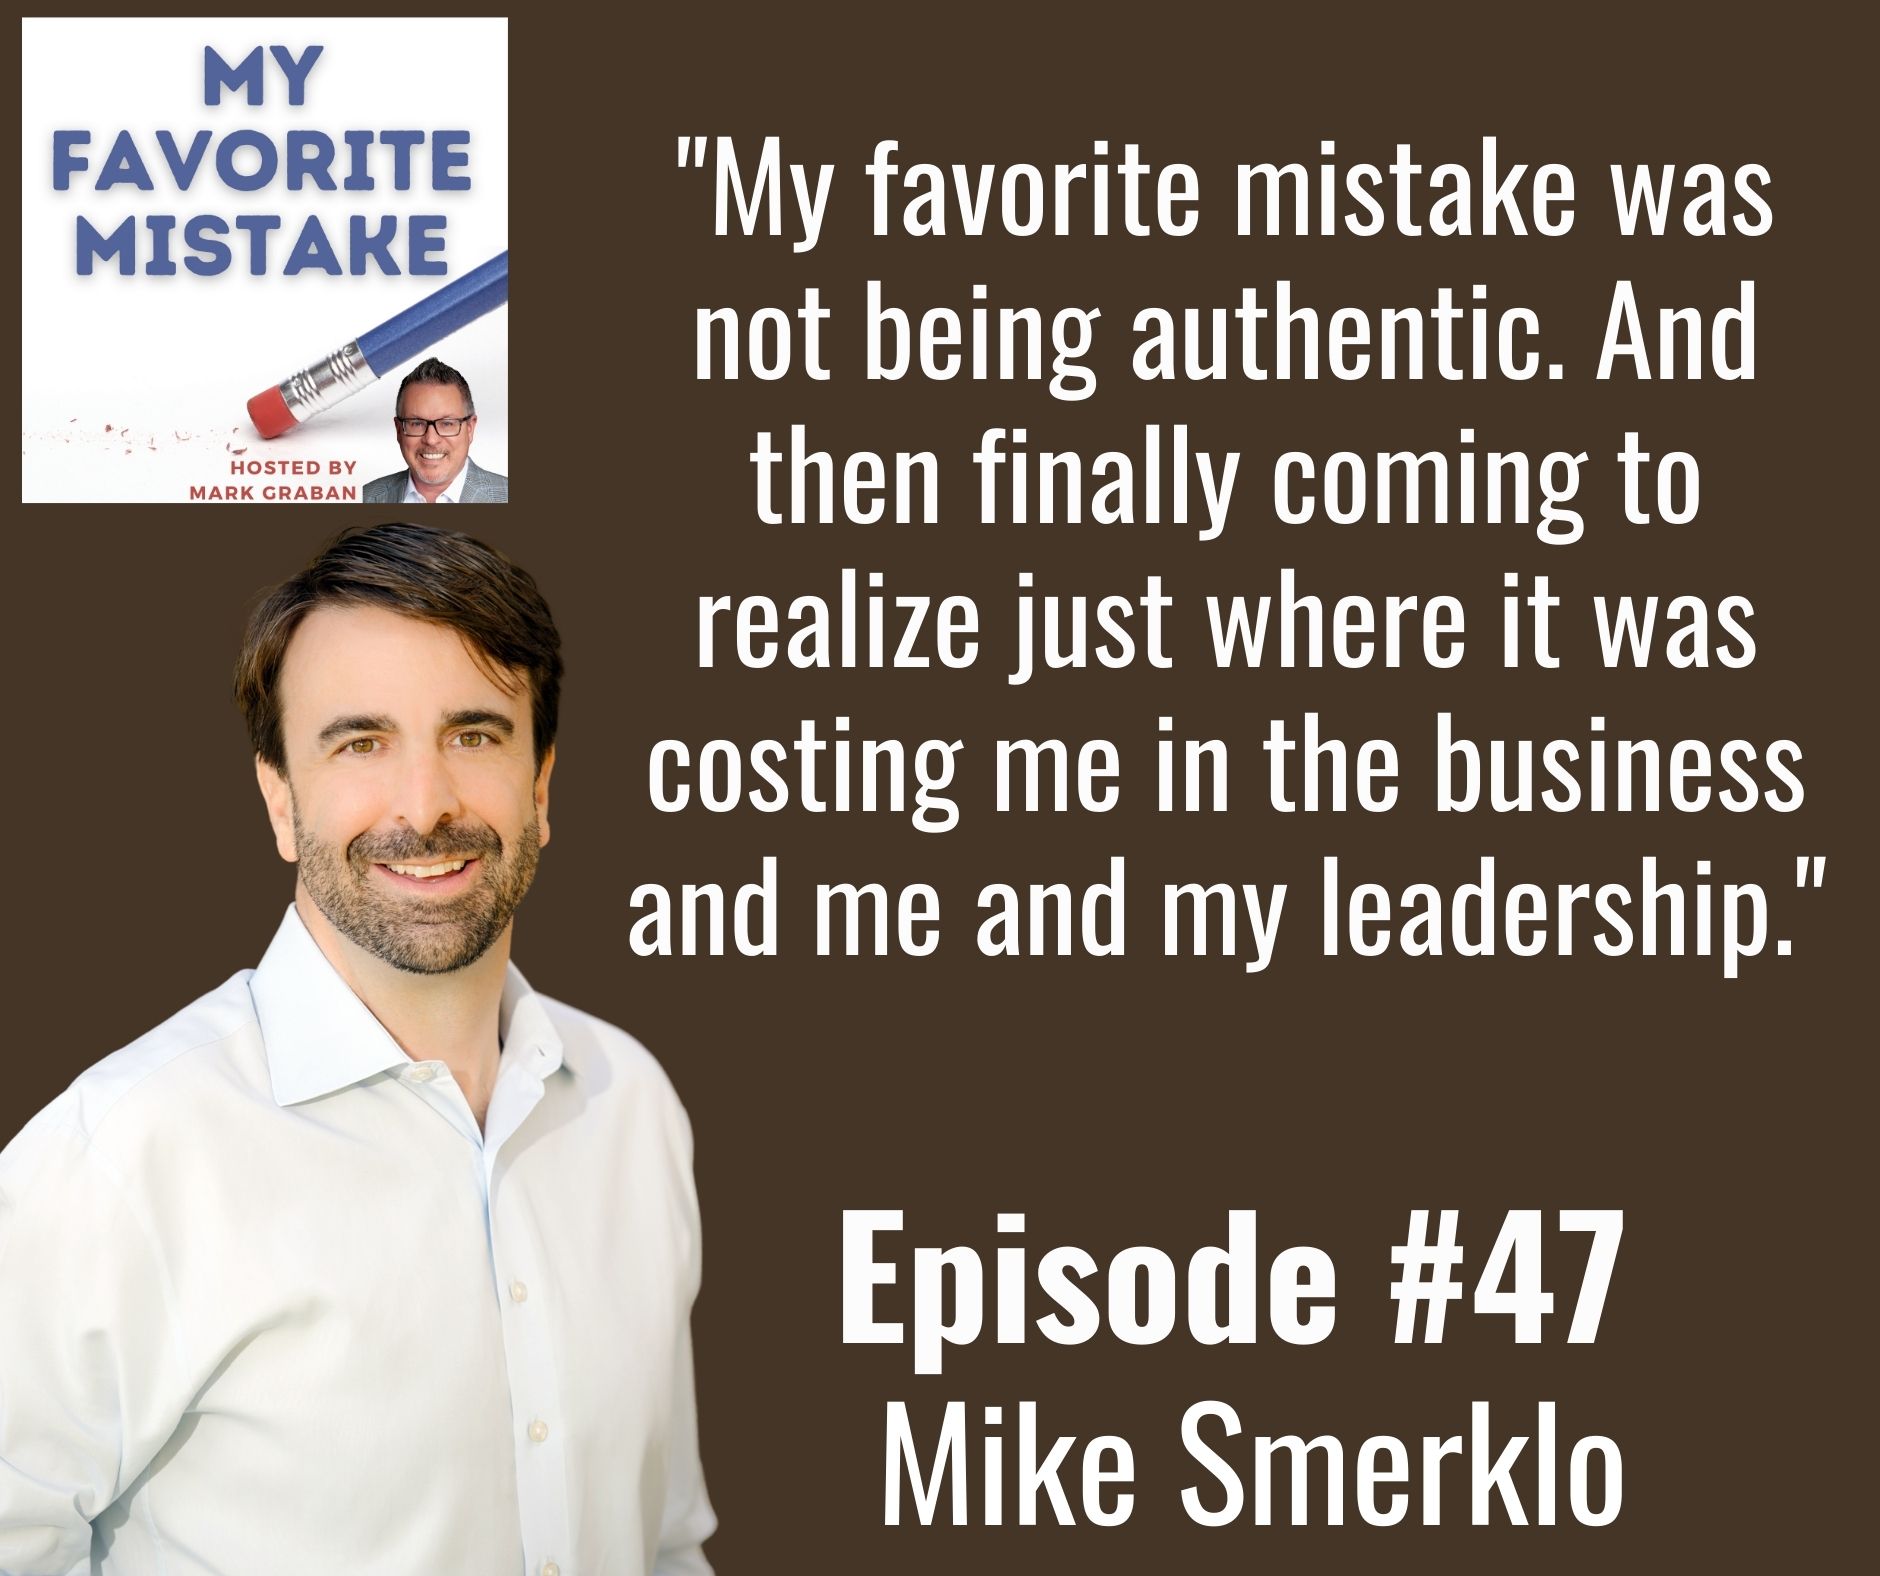 "My favorite mistake was not being authentic. And then finally coming to realize just where it was costing me in the business and me and my leadership."